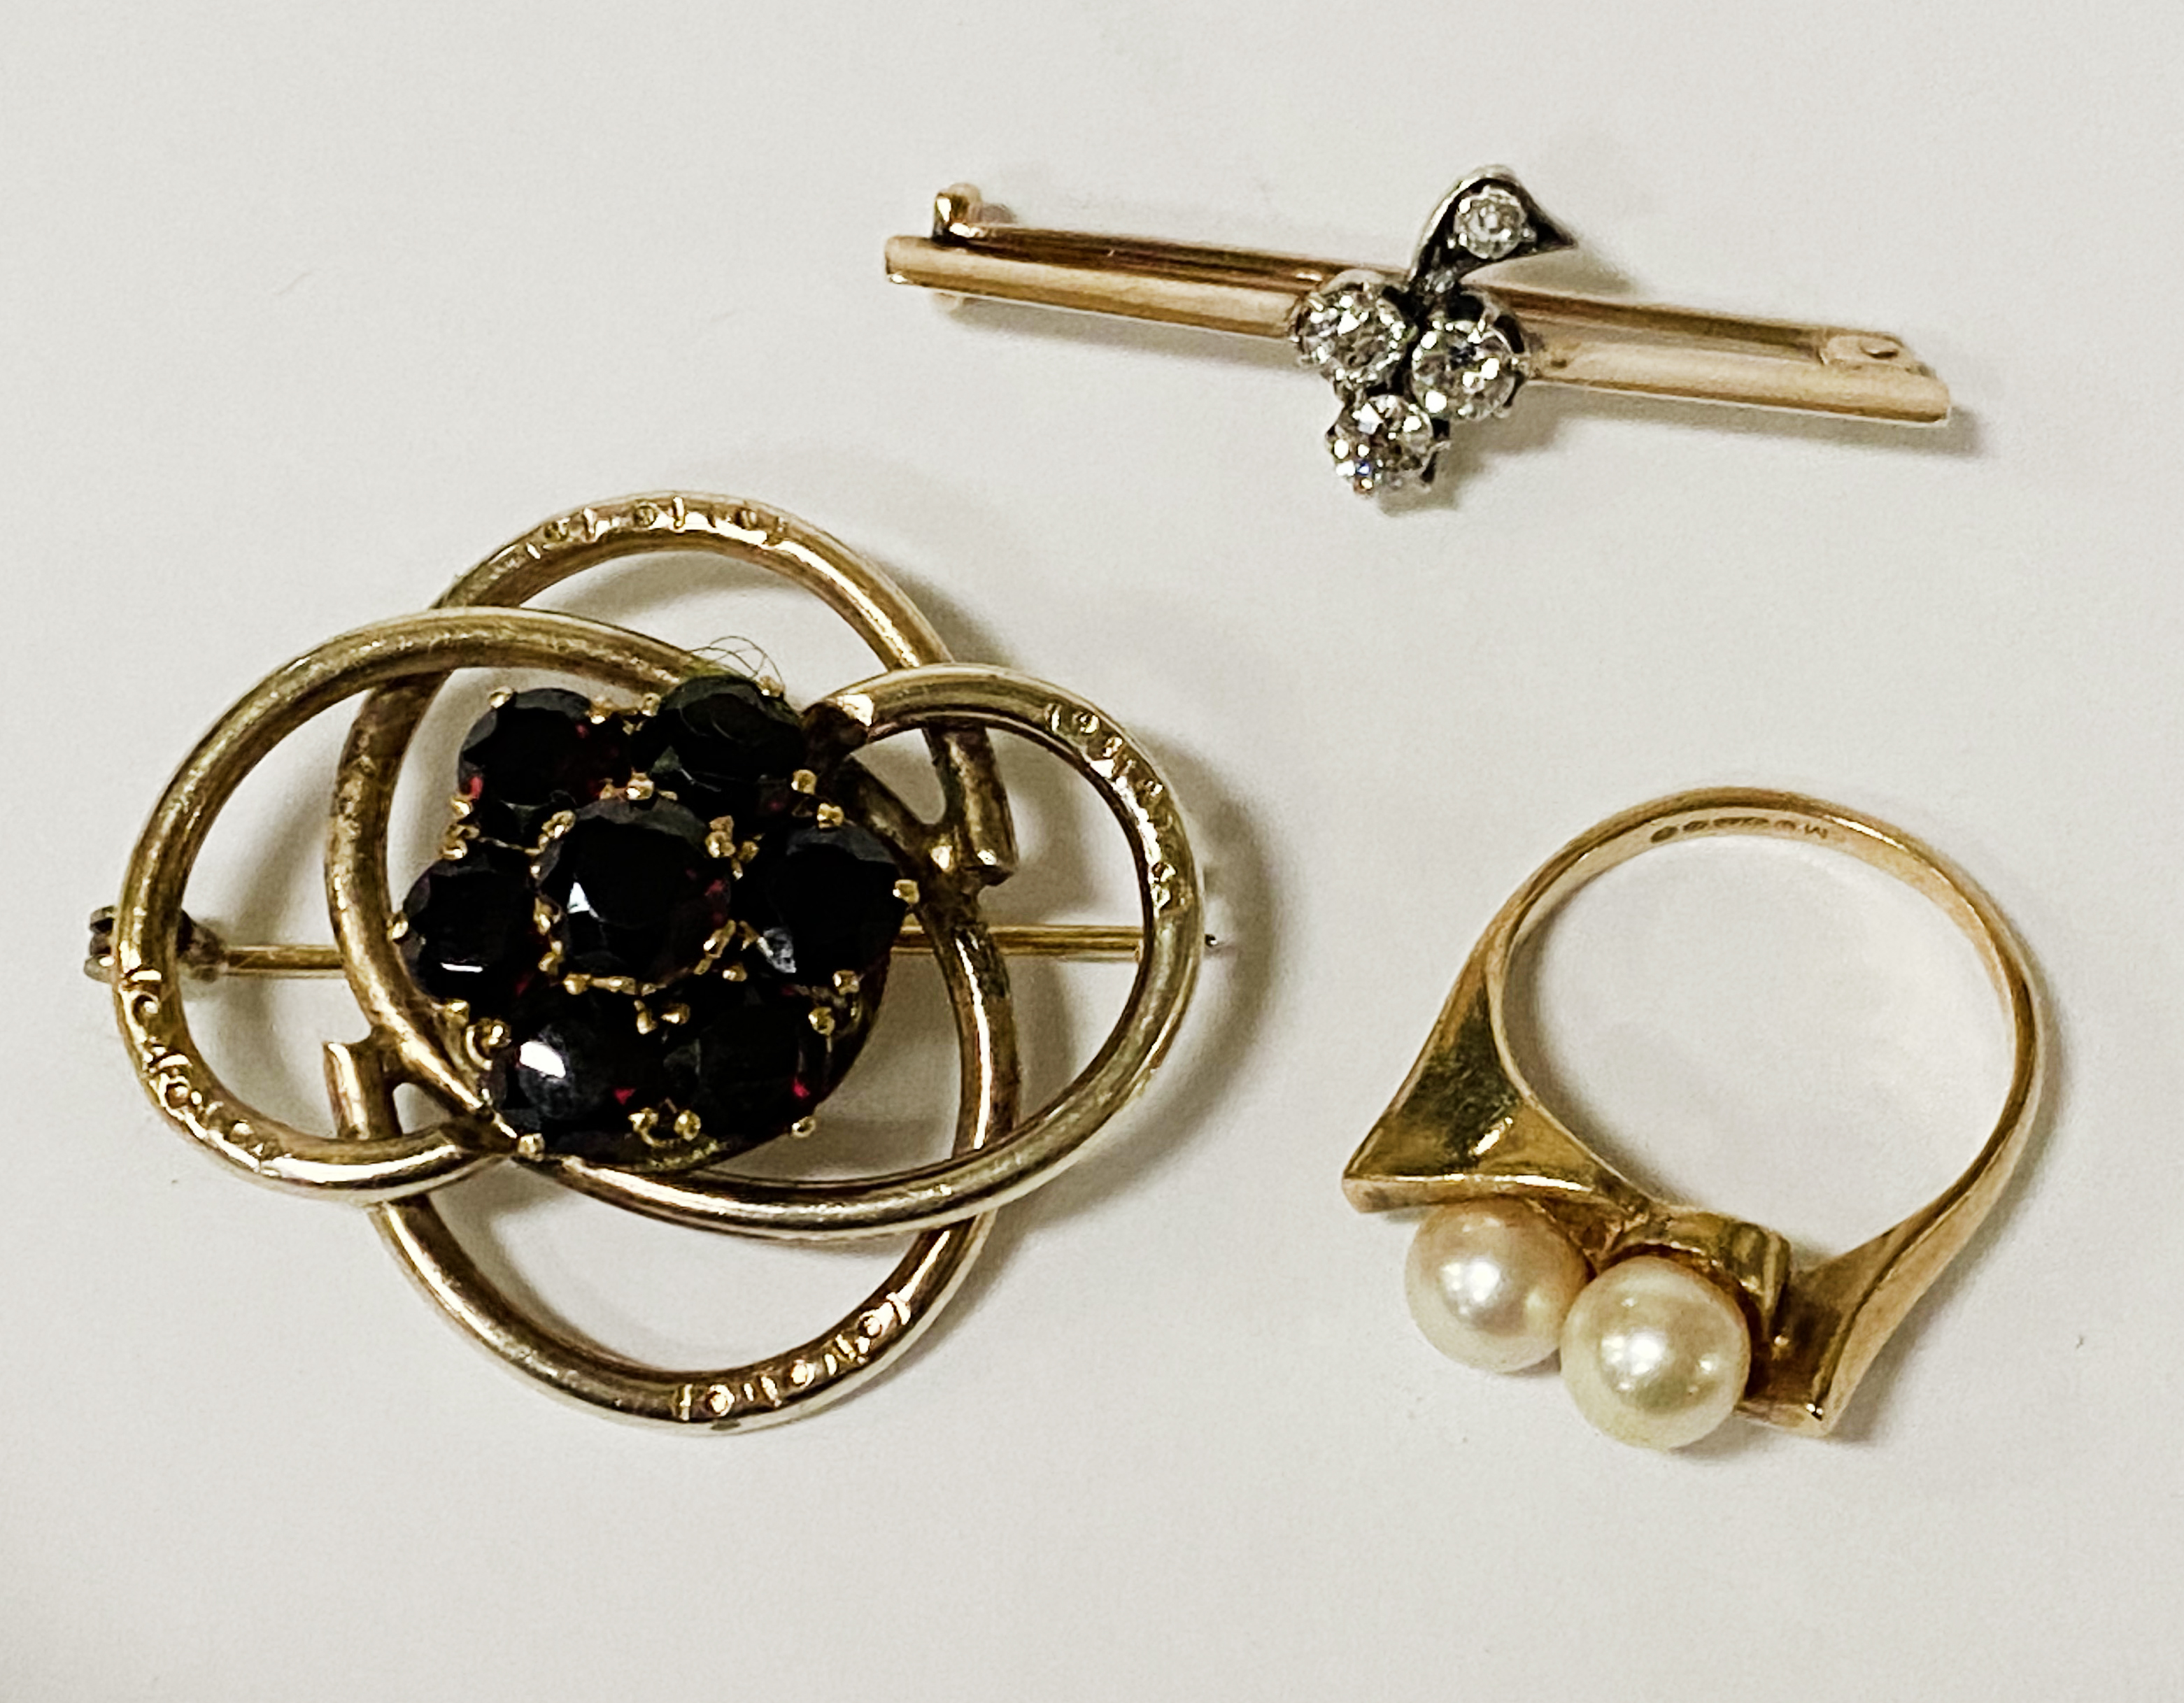 9 CT. GOLD PEARL RING, DIAMOND BROOCH & GILDED SILVER BROOCH 15.6 GRAMS APPROX